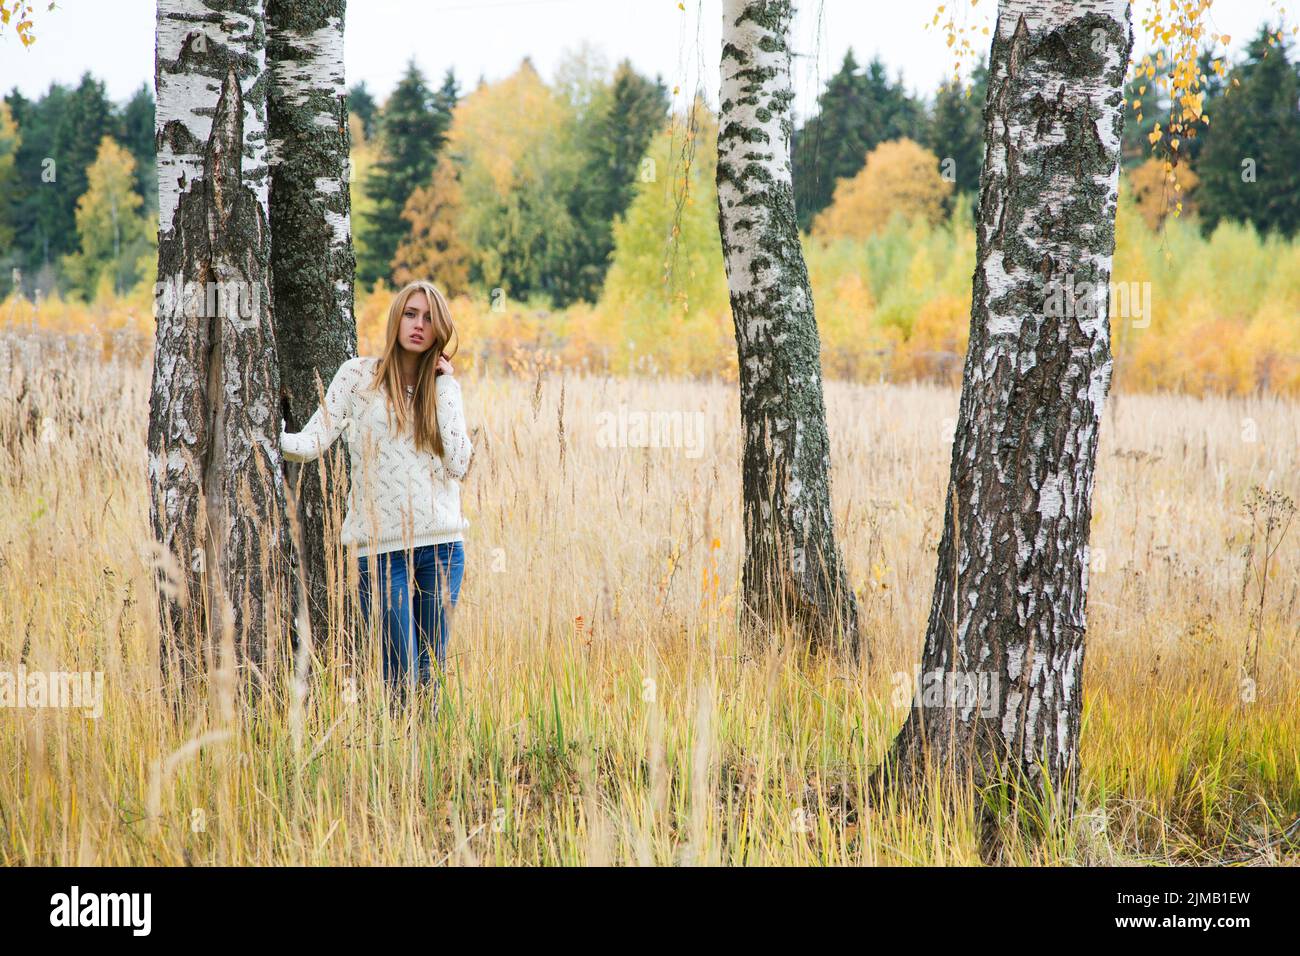 Girl among the trees in the high yellow grass in the fall Stock Photo